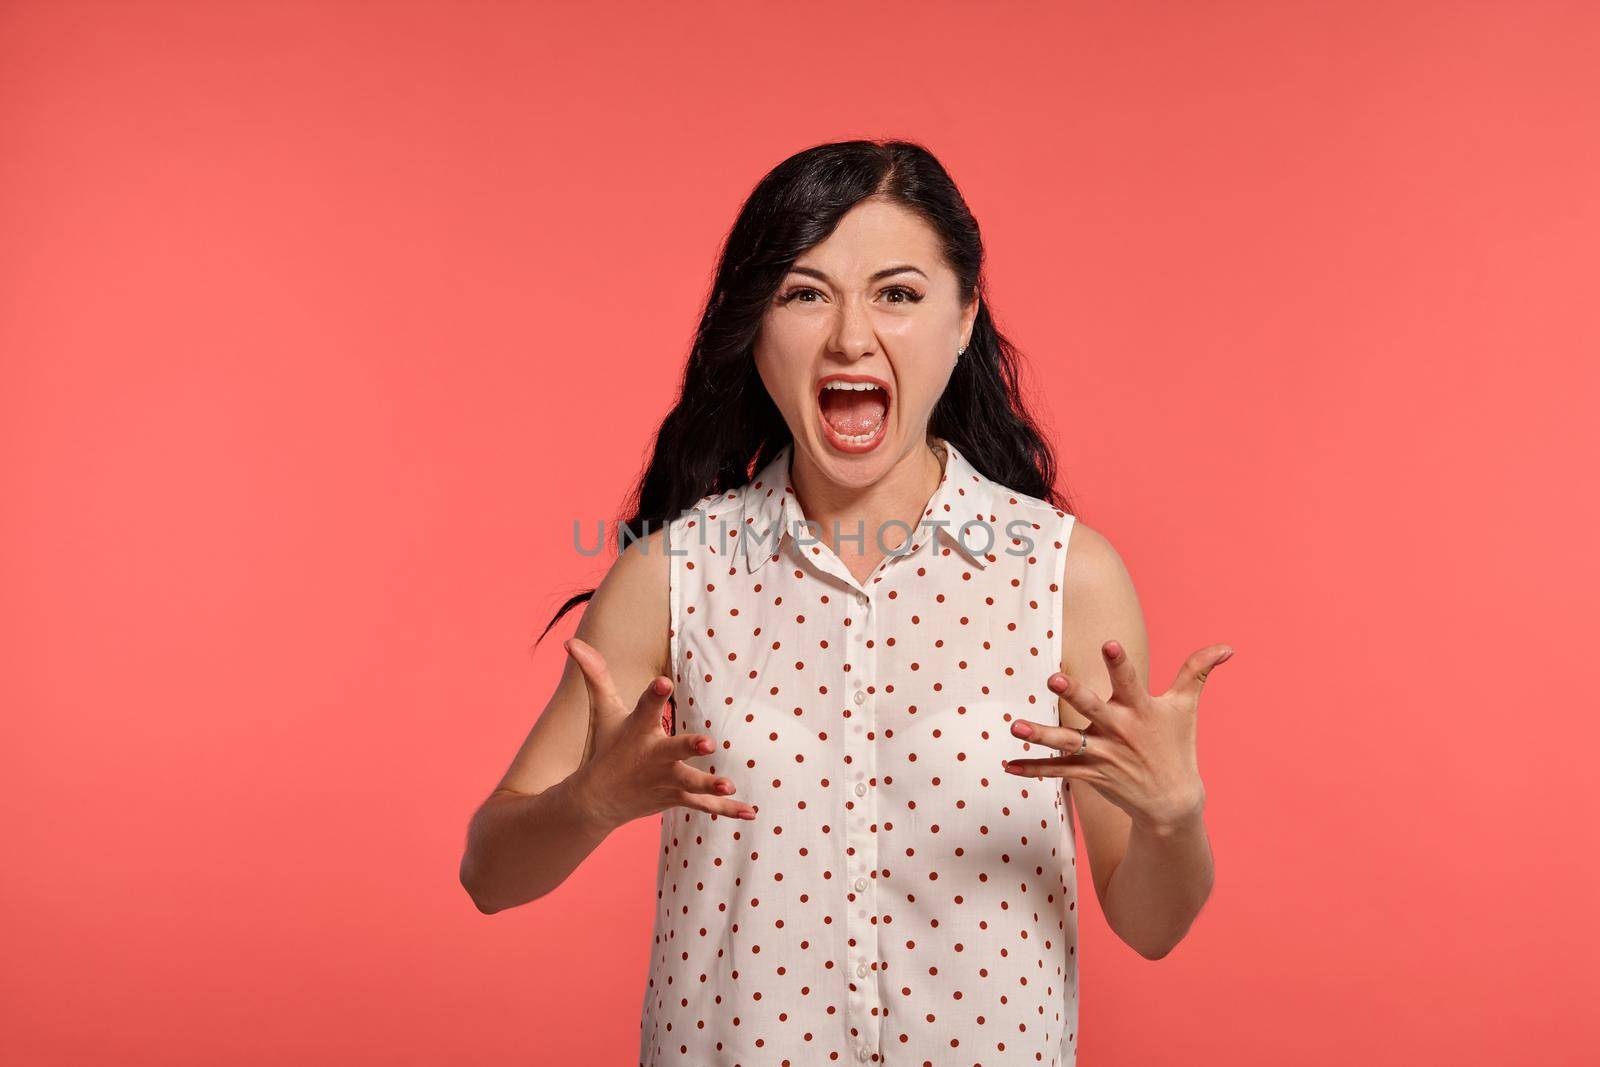 Studio shot of a beautiful girl teenager, screaming loudly, wearing casual white polka dot blouse. Little brunette female feeling unhappy, posing over a pink background. People and sincere emotions.